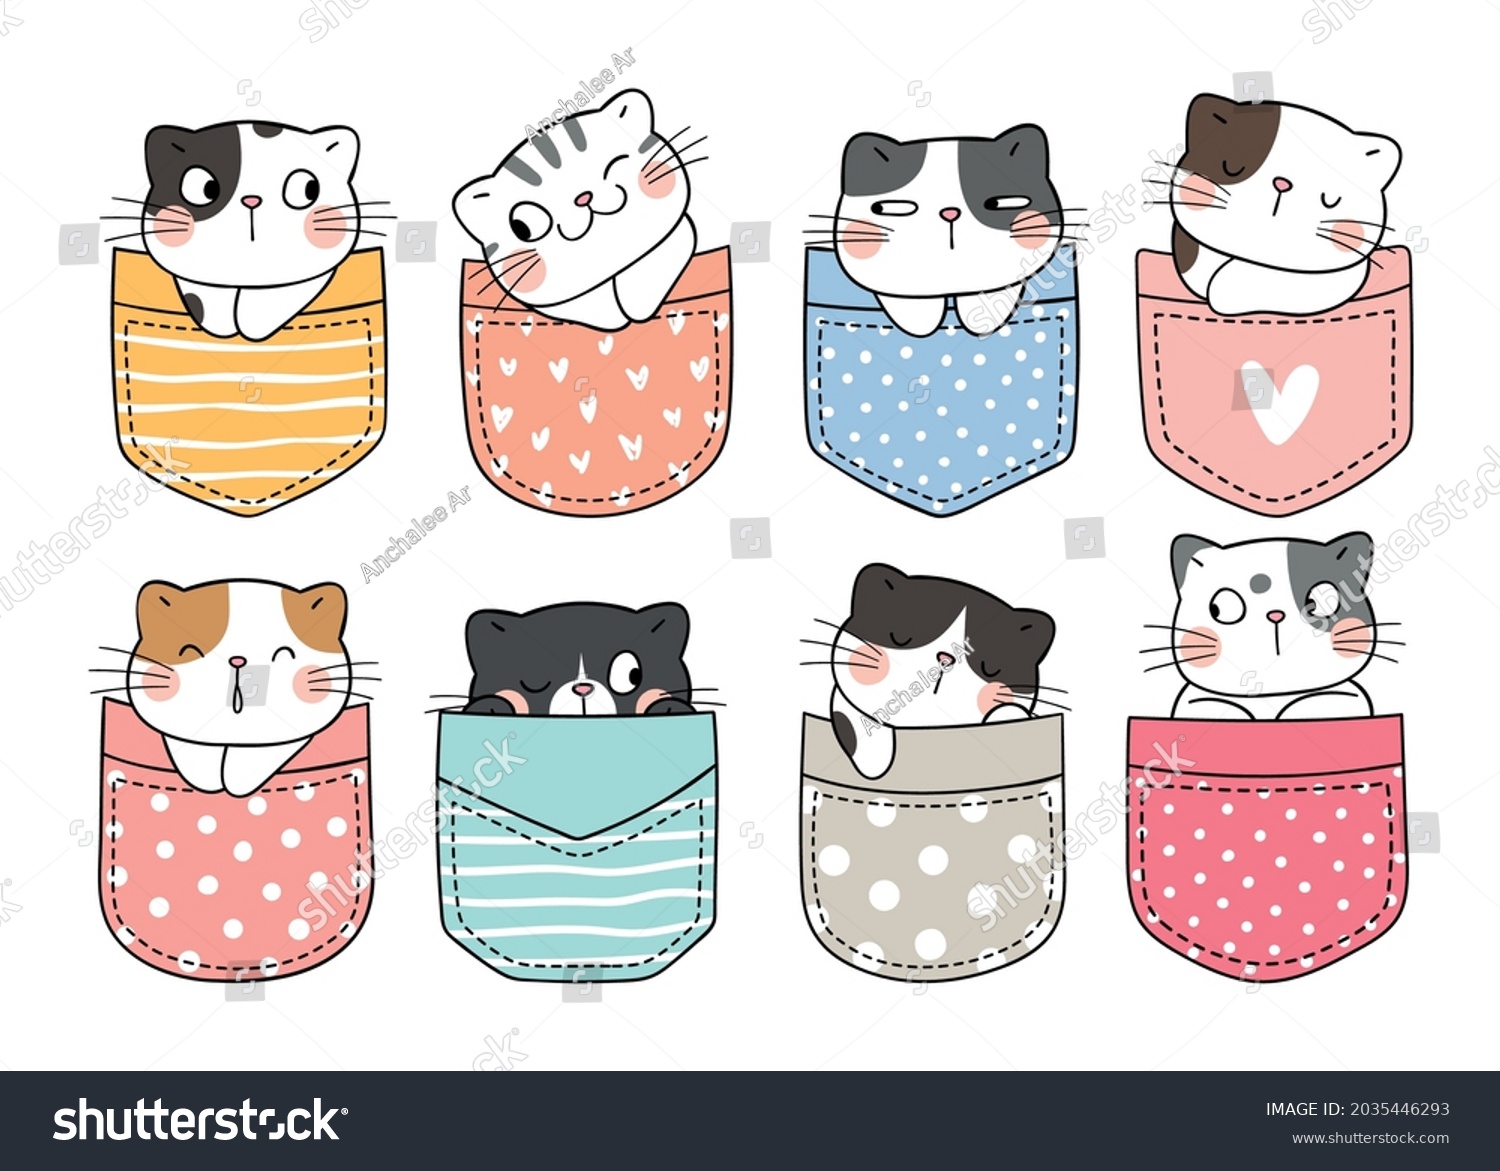 SVG of Draw vector illustration character design collection cute cats in pocket Doodle cartoon style svg